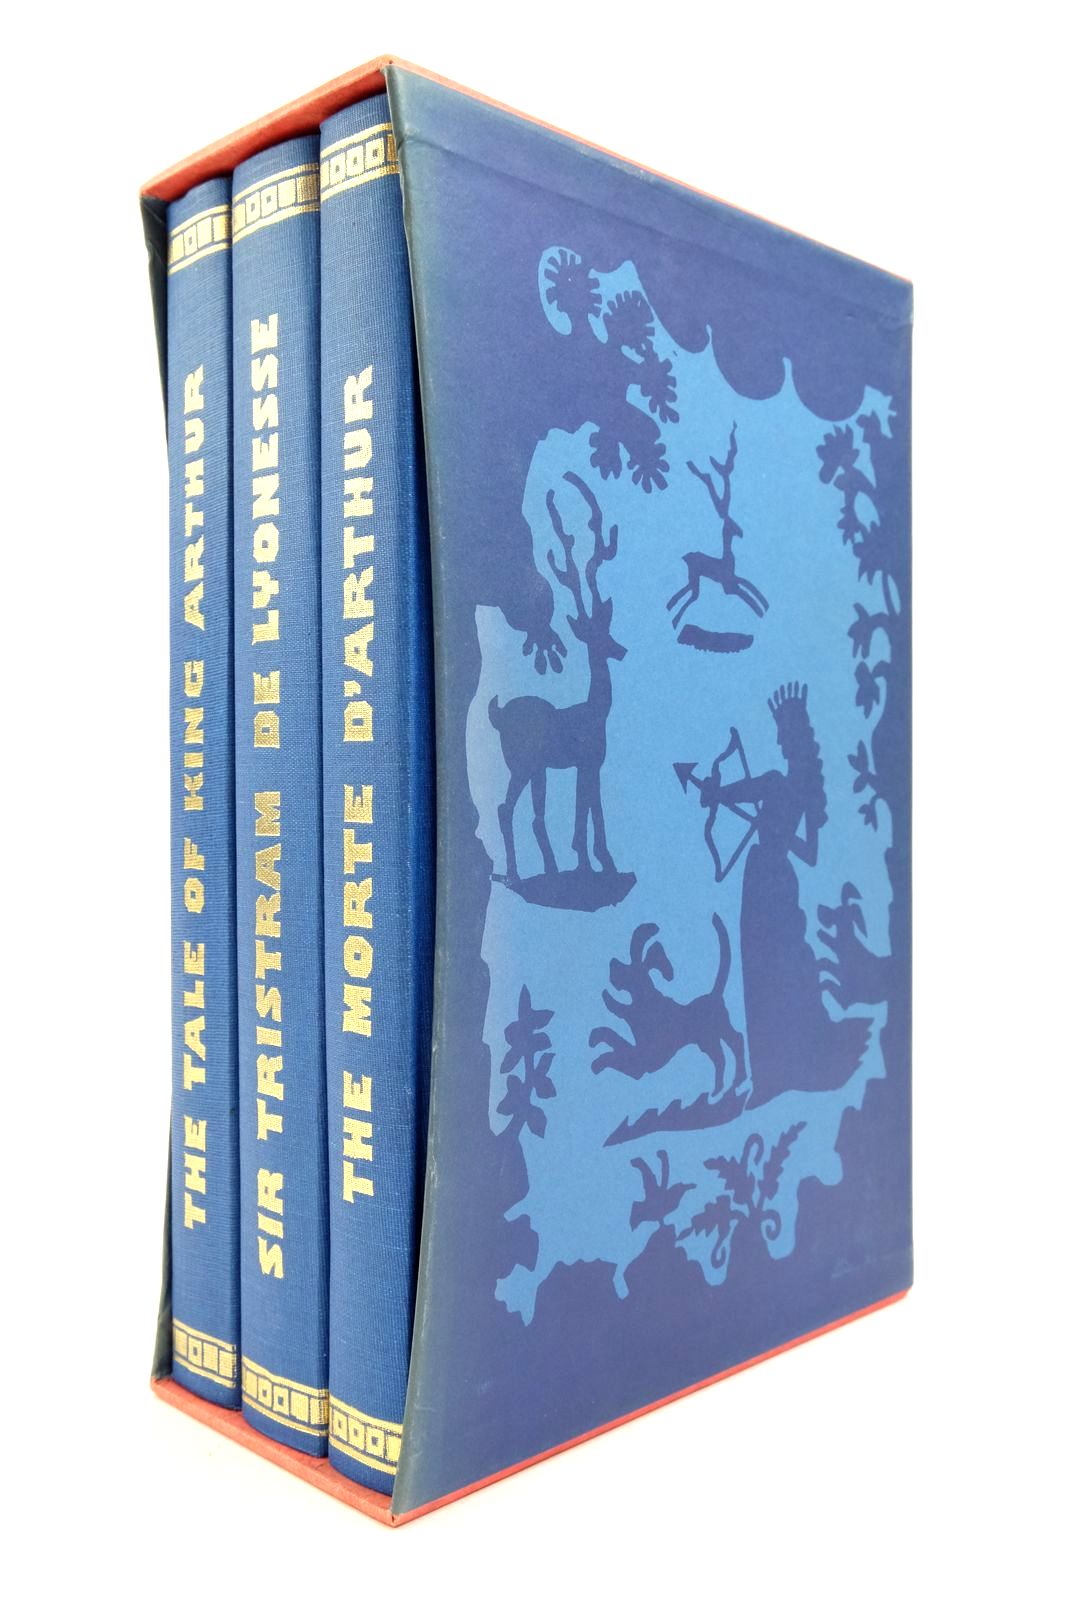 Photo of SIR THOMAS MALORY'S CHRONICLES OF KING ARTHUR (3 VOLUMES) written by Malory, Thomas Bradbury, Sue Crossley-Holland, Kevin illustrated by Bawden, Edward published by Folio Society (STOCK CODE: 2138770)  for sale by Stella & Rose's Books